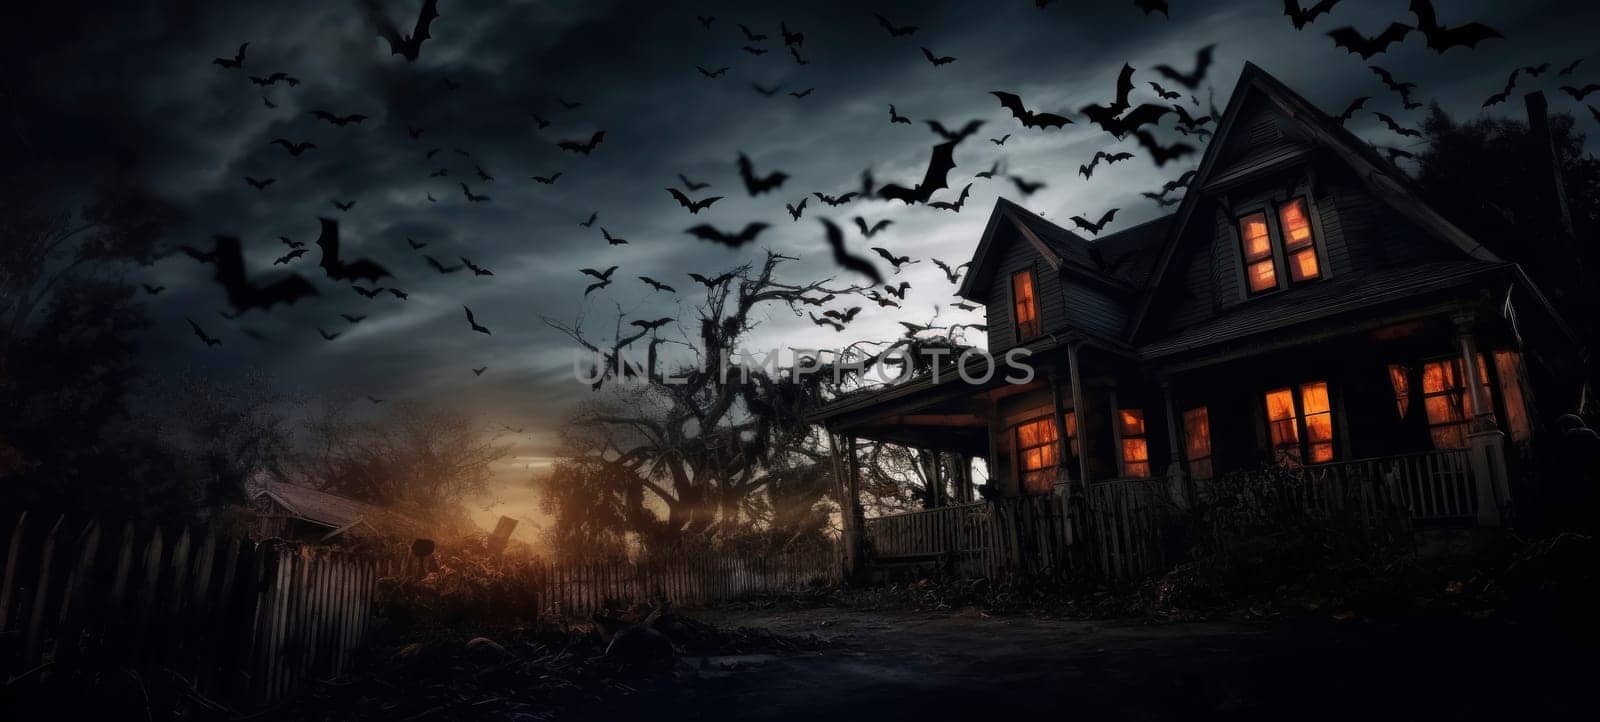 Eerie haunted house at twilight with a swarm of bats in the sky, creating a chilling atmosphere of a horror scene.